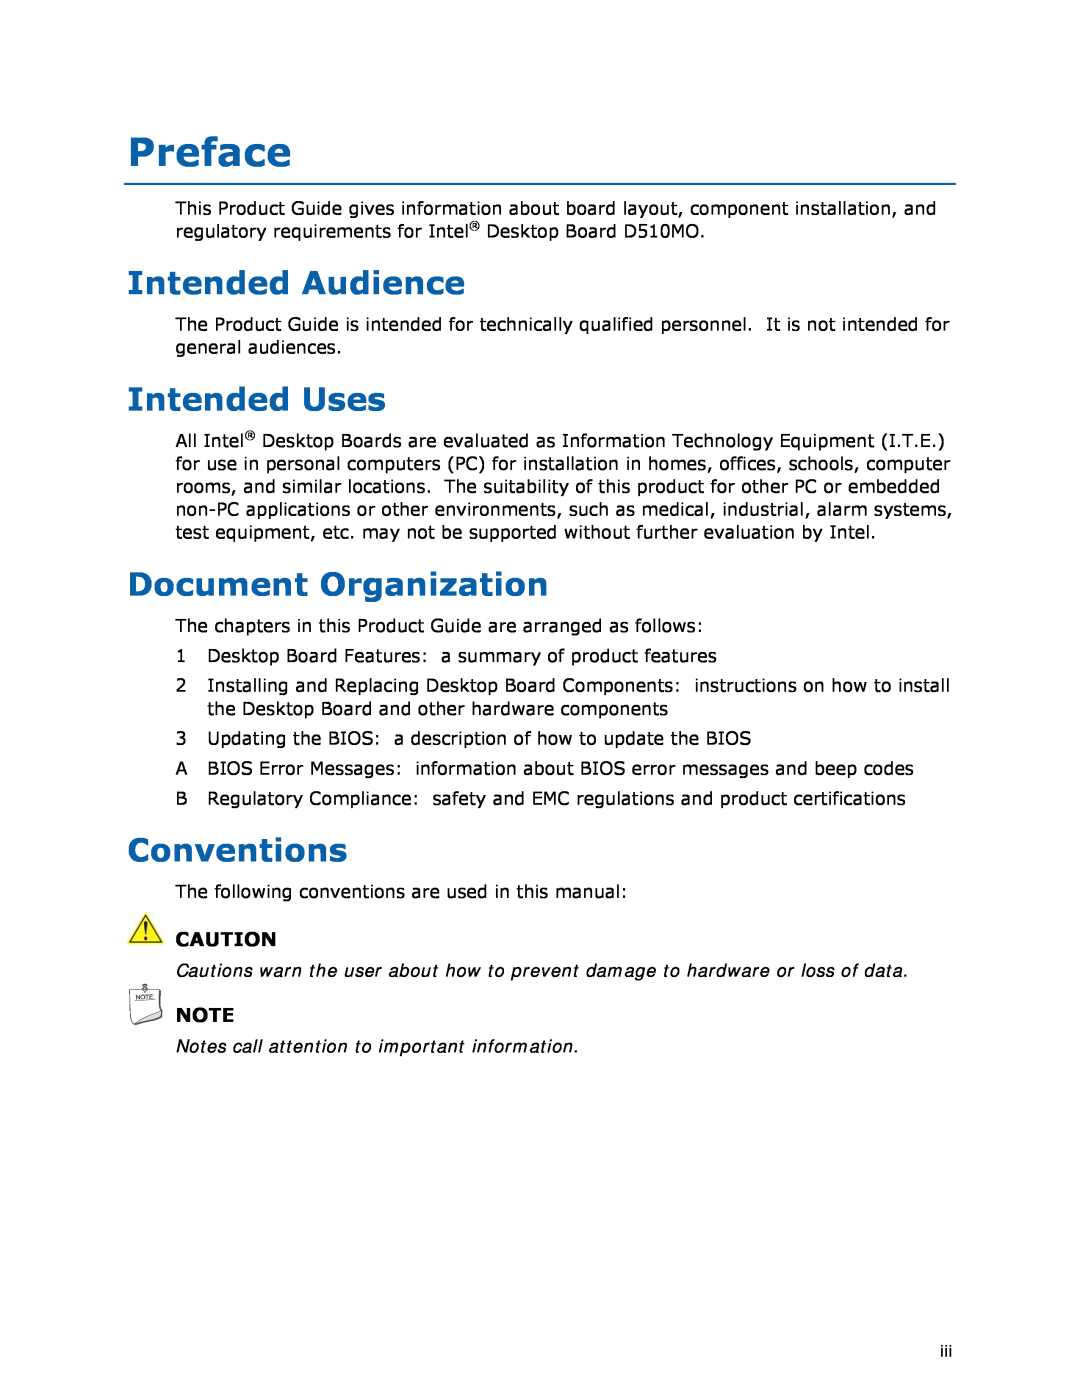 Intel D510MO manual Preface, Intended Audience, Intended Uses, Document Organization, Conventions 